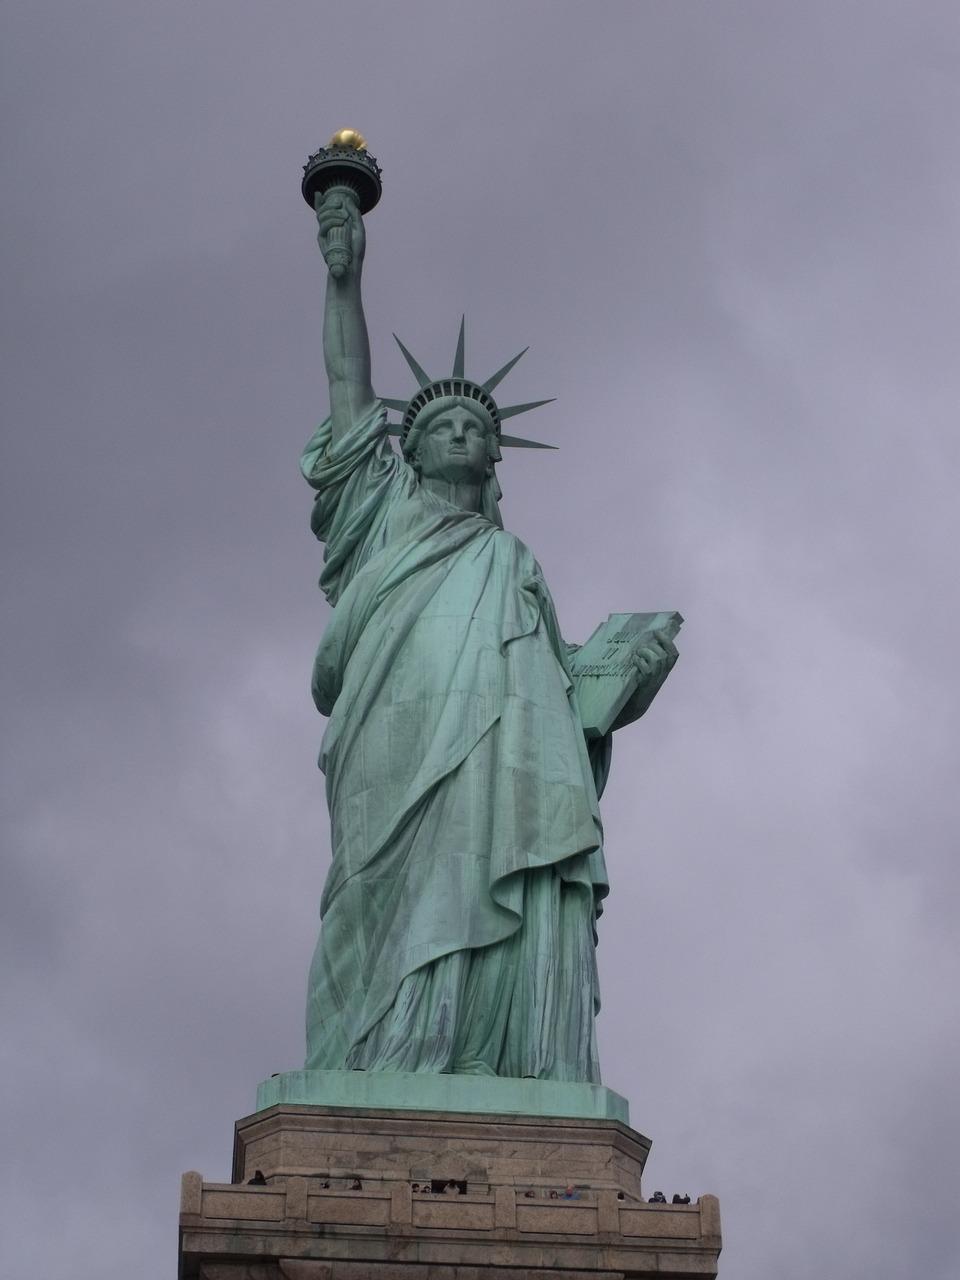 How tall is the Statue of Liberty from feet to torch? 